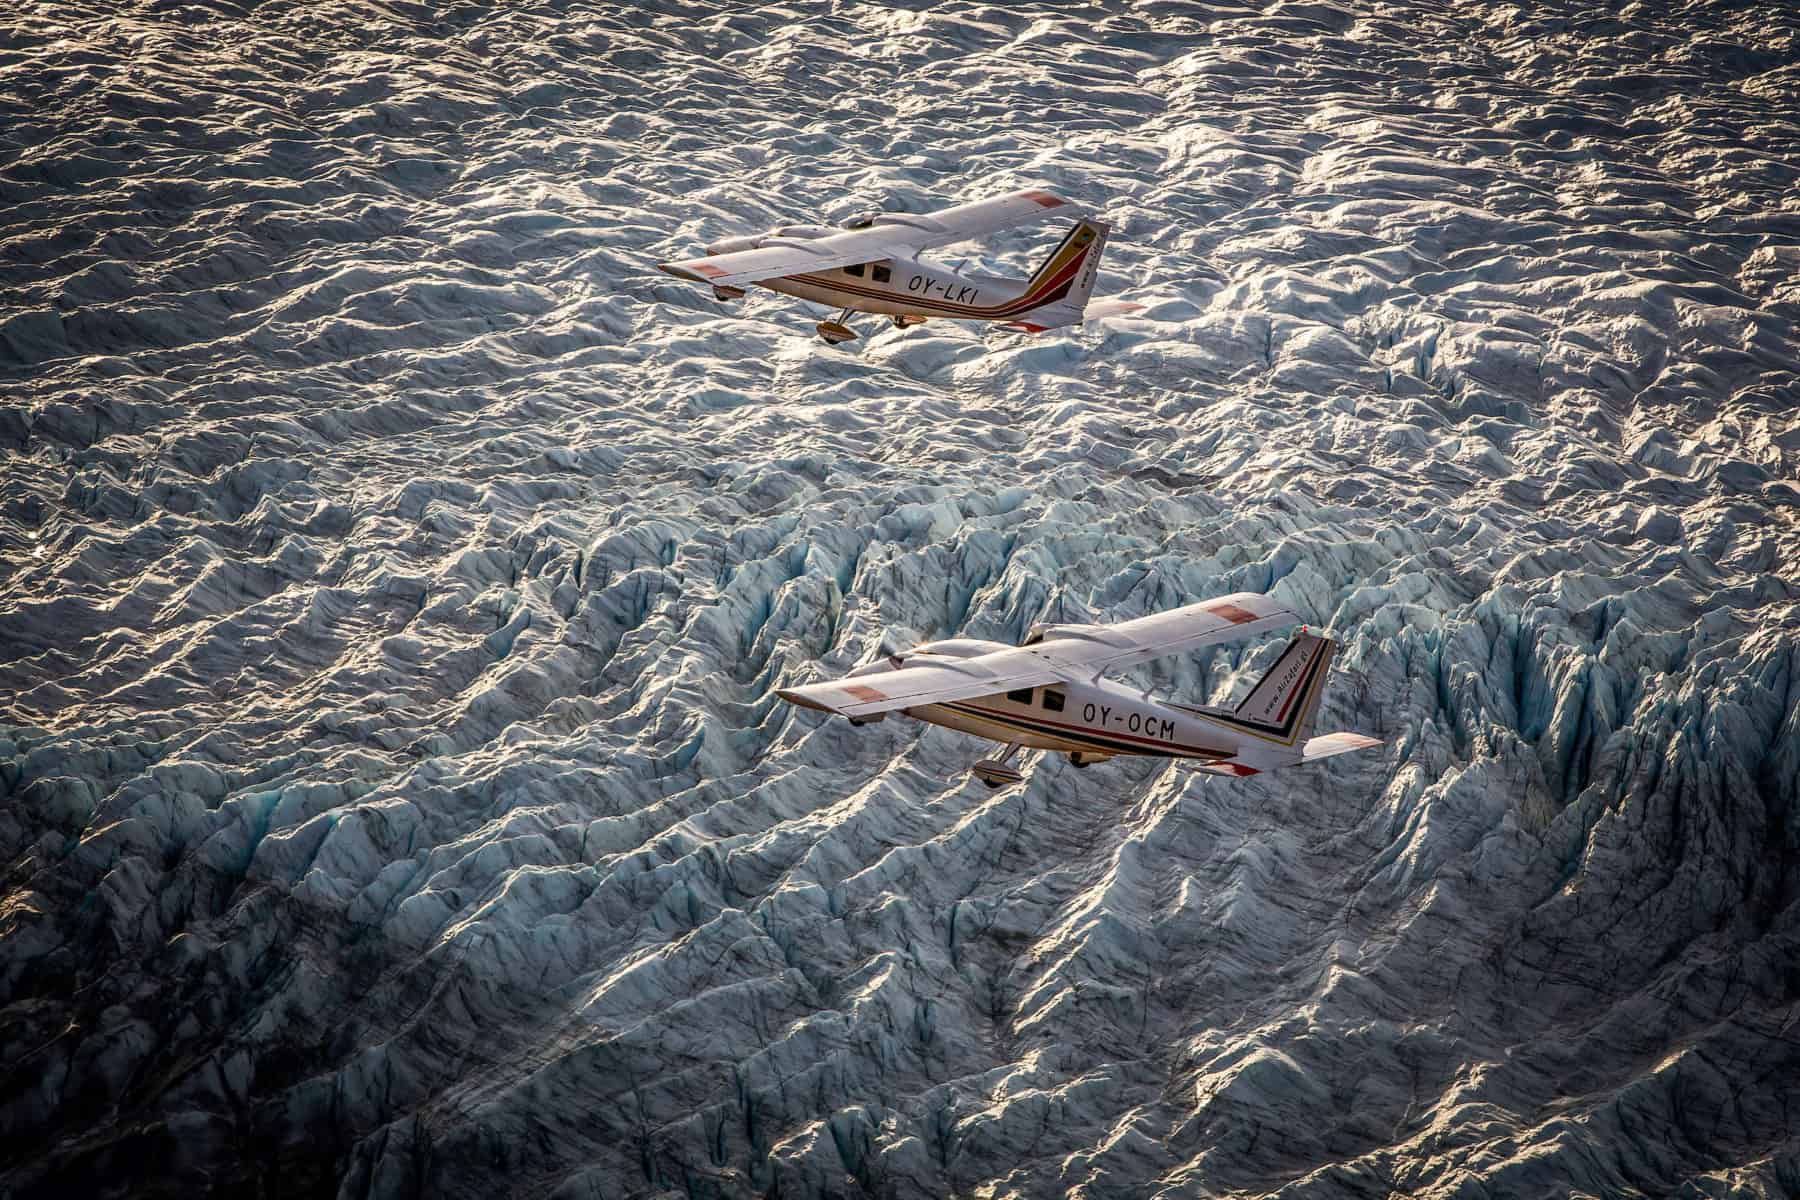 Two planes on a scenic flight over the enormous Greenlandic Icesheet near Kangerlussuaq